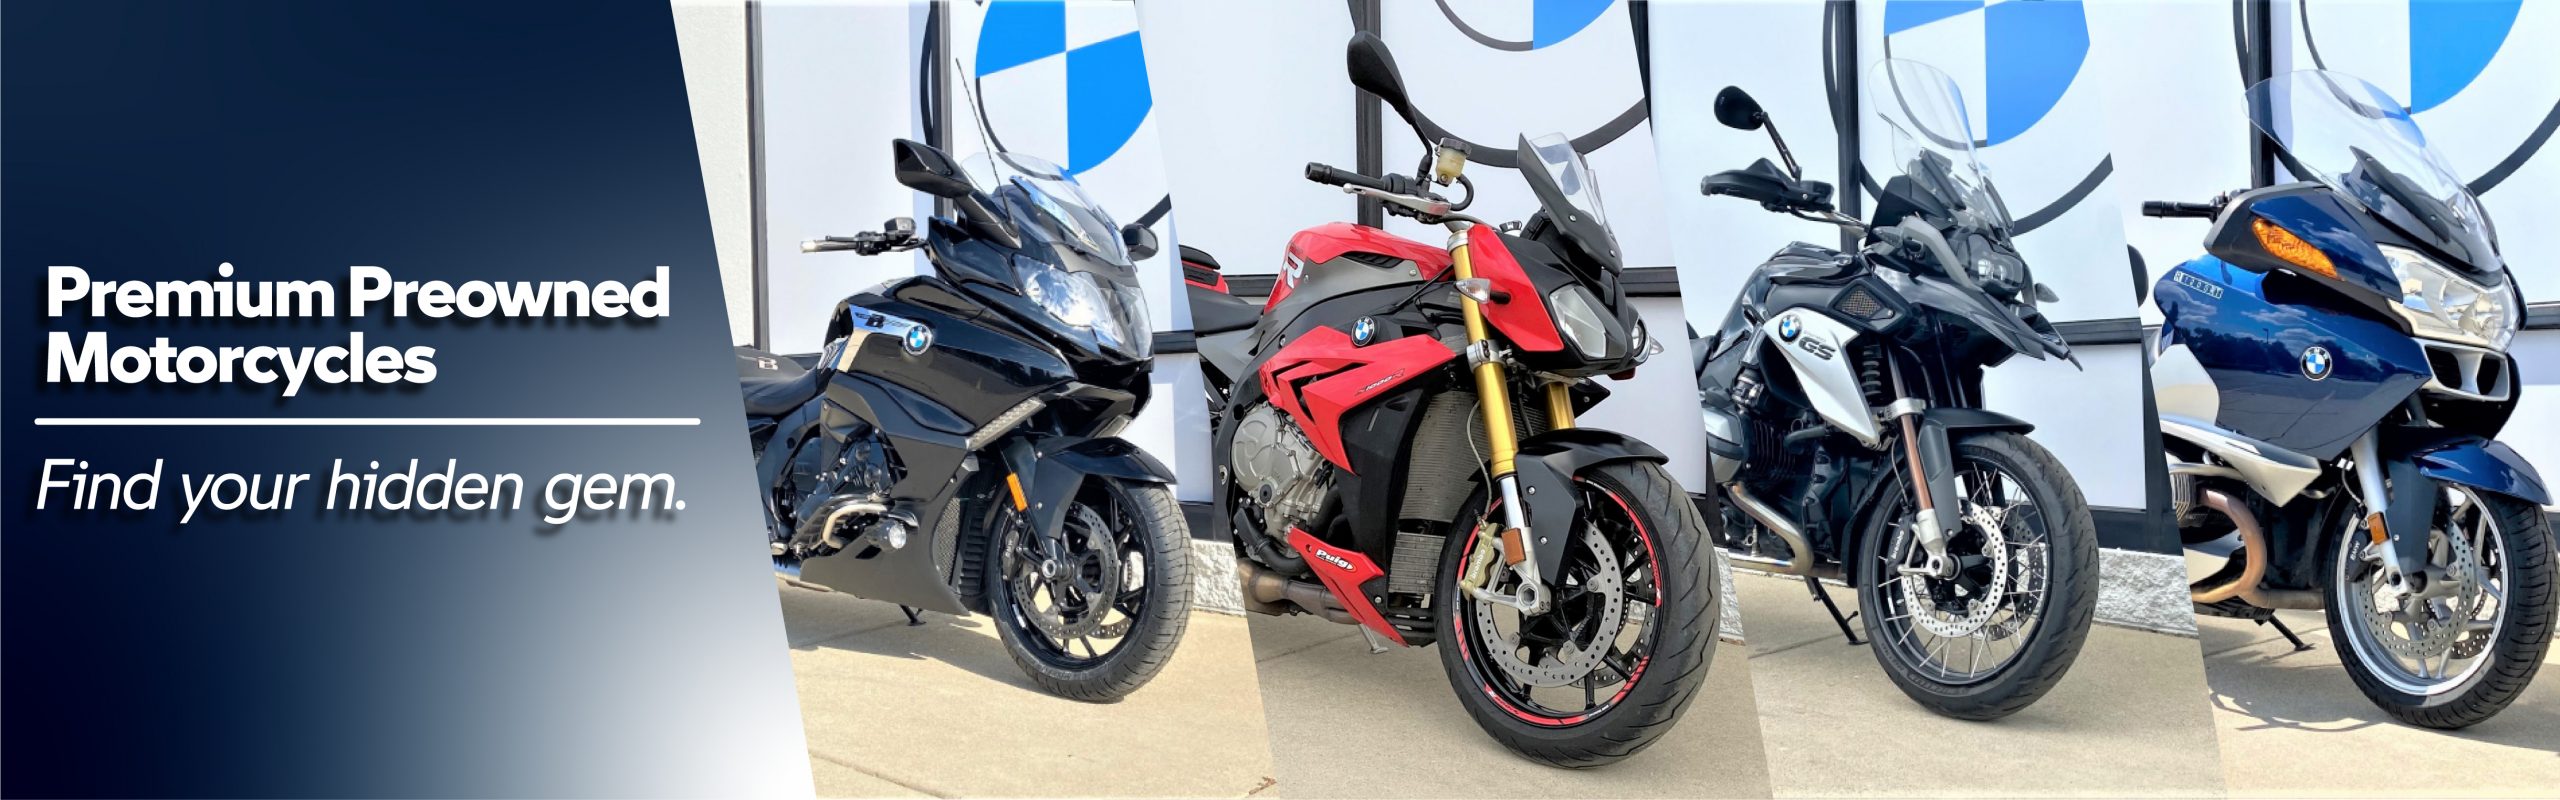 Bmw Motorcycles Of Southeast Michigan | Reviewmotors.co